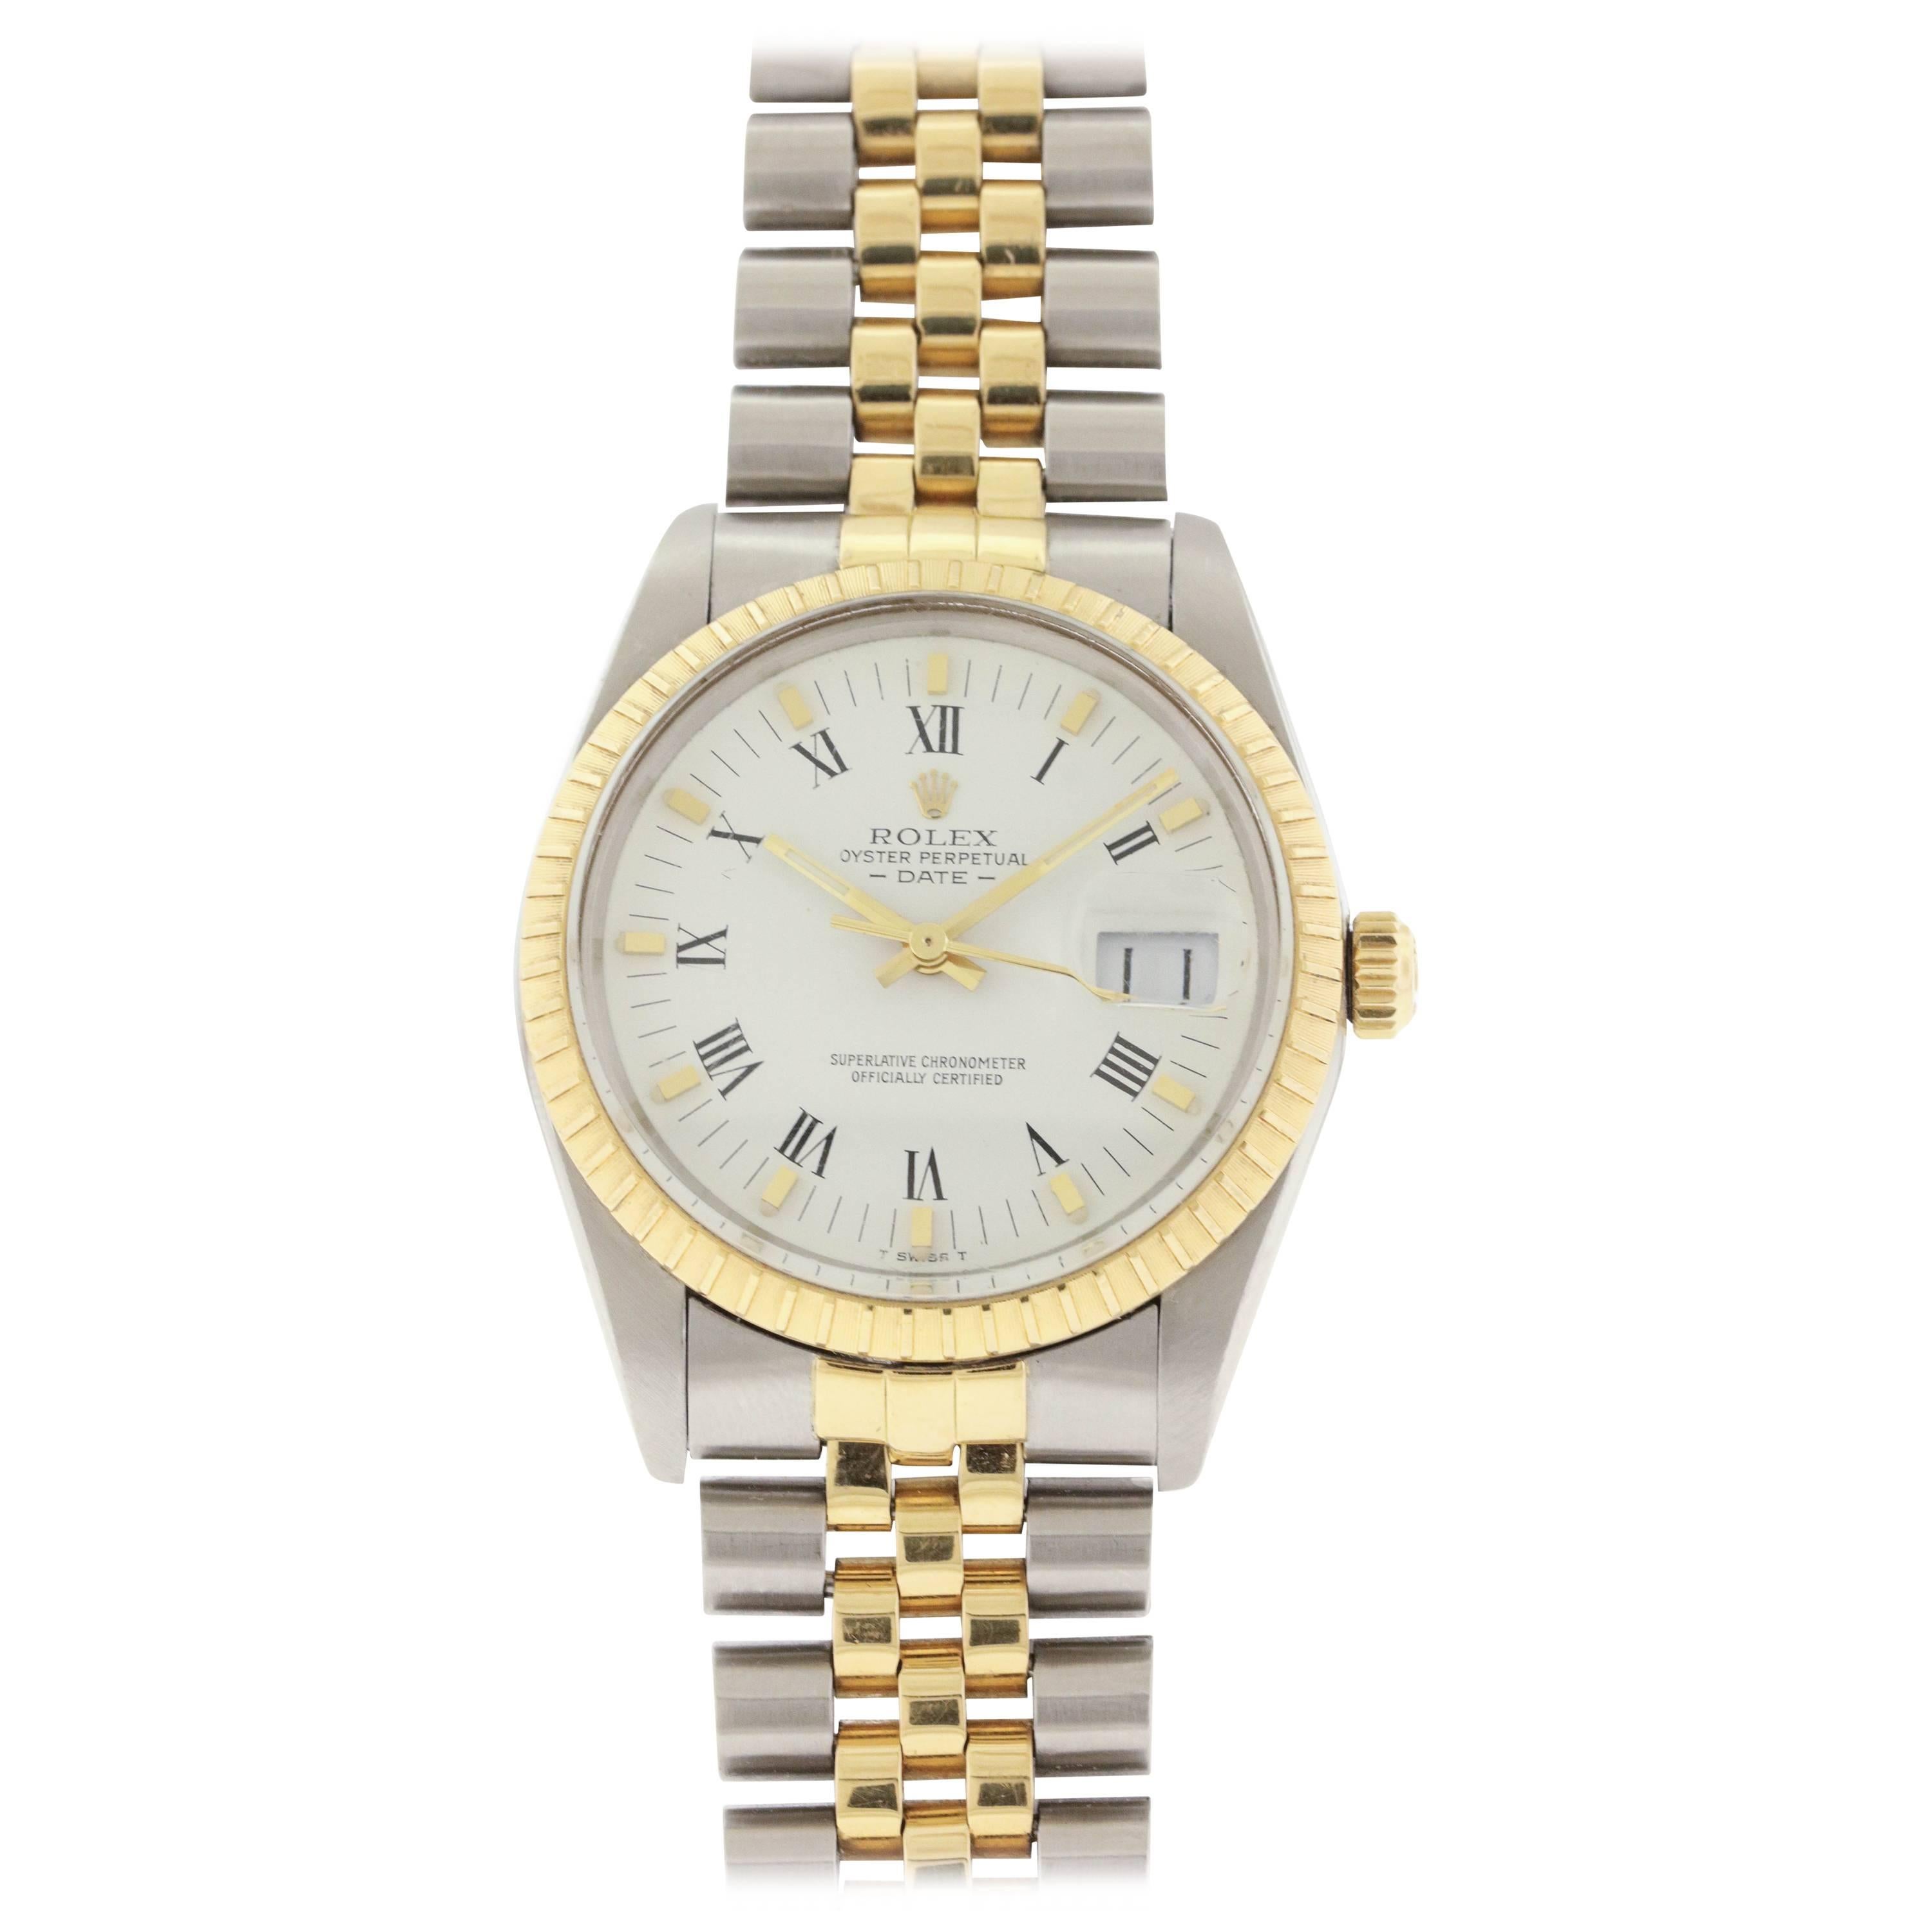 Rolex Stainless Steel Yellow Gold Oyster Perpetual Date Wristwatch